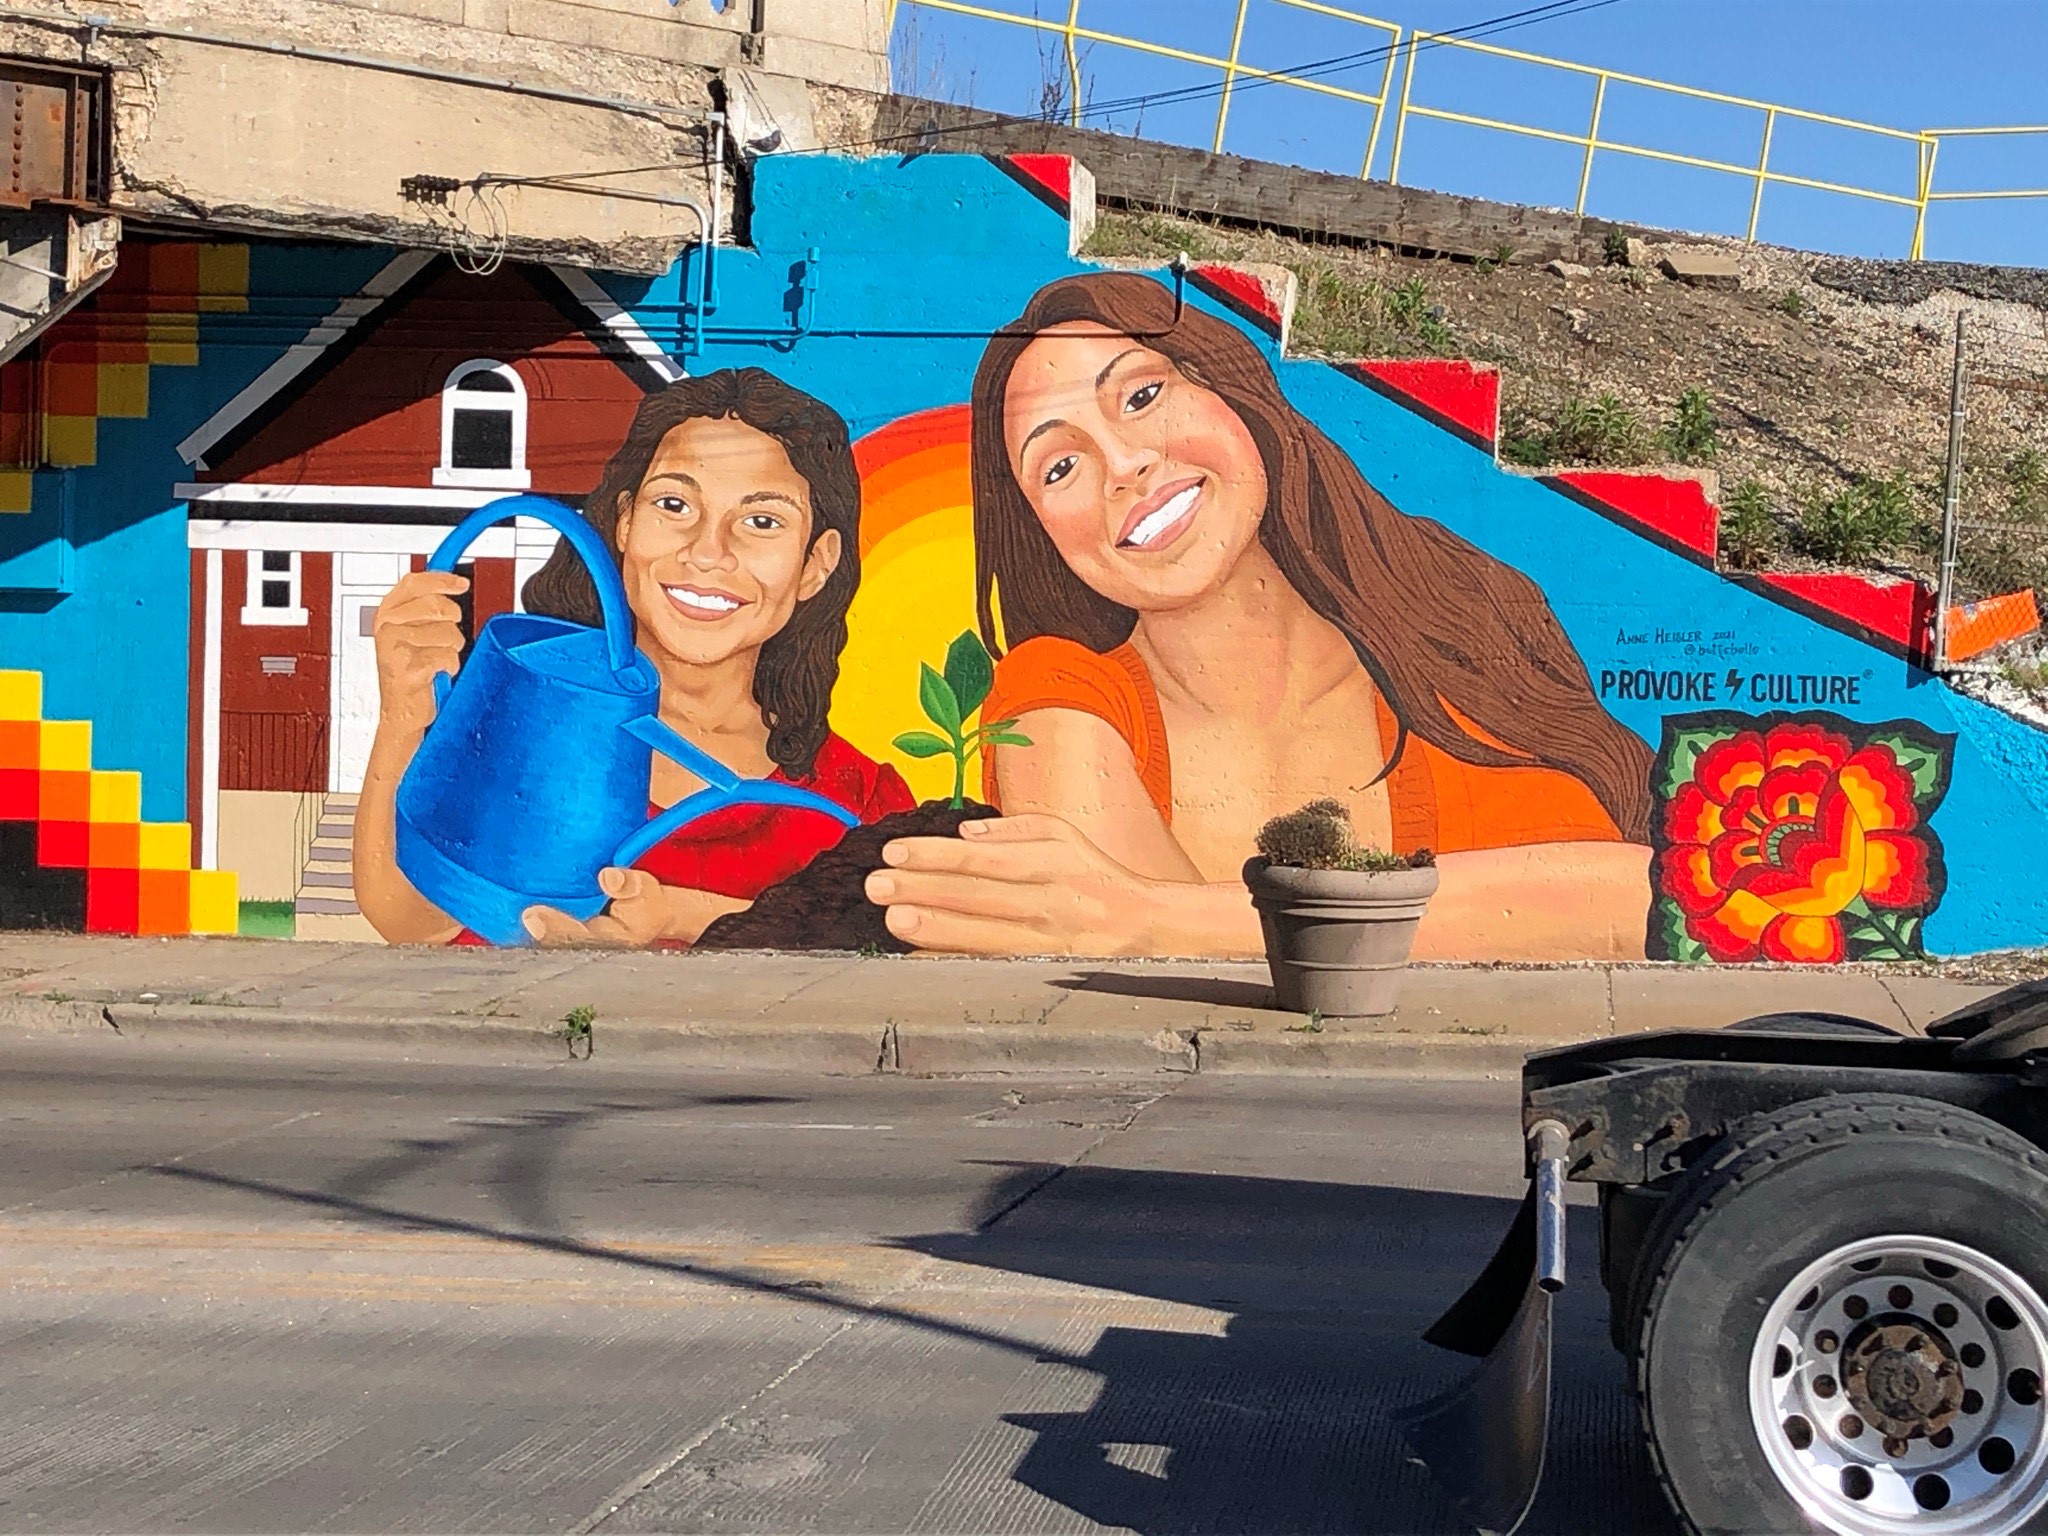 Anne Heisler says the skills she picked up decorating cakes for about 15 years help with her art career, which includes this mural painted on a viaduct at 47th Street and Archer Avenue in Archer Heights on the Southwest Side.